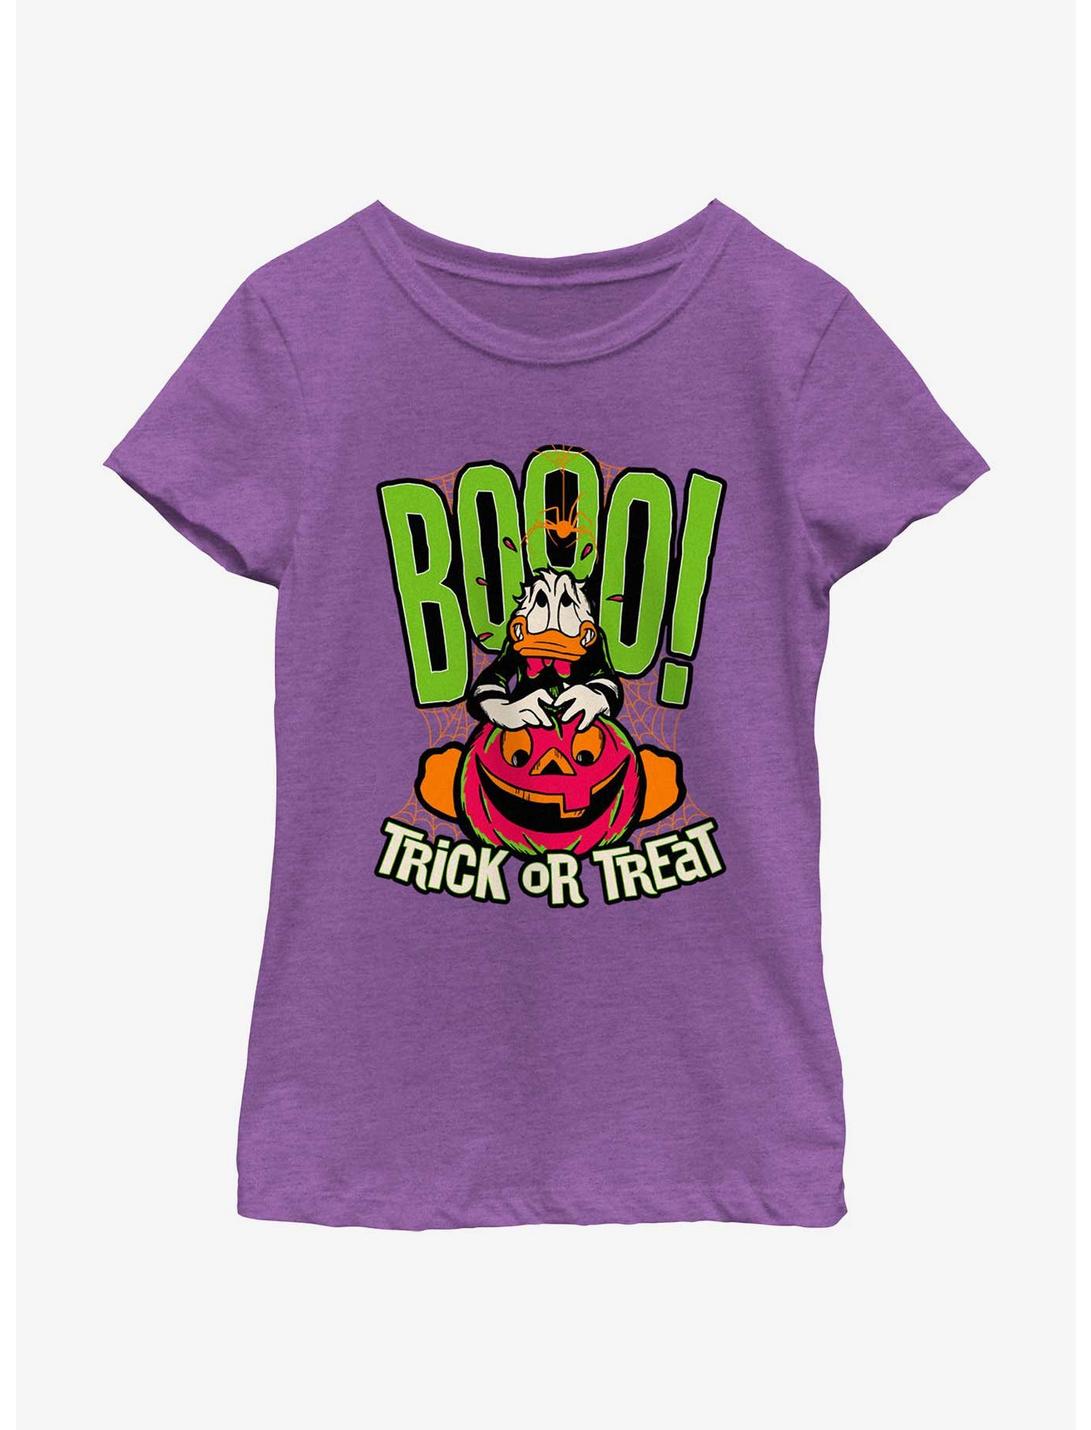 Disney100 Halloween Boo Donald Trick or Treat Youth Girl's T-Shirt, PURPLE BERRY, hi-res